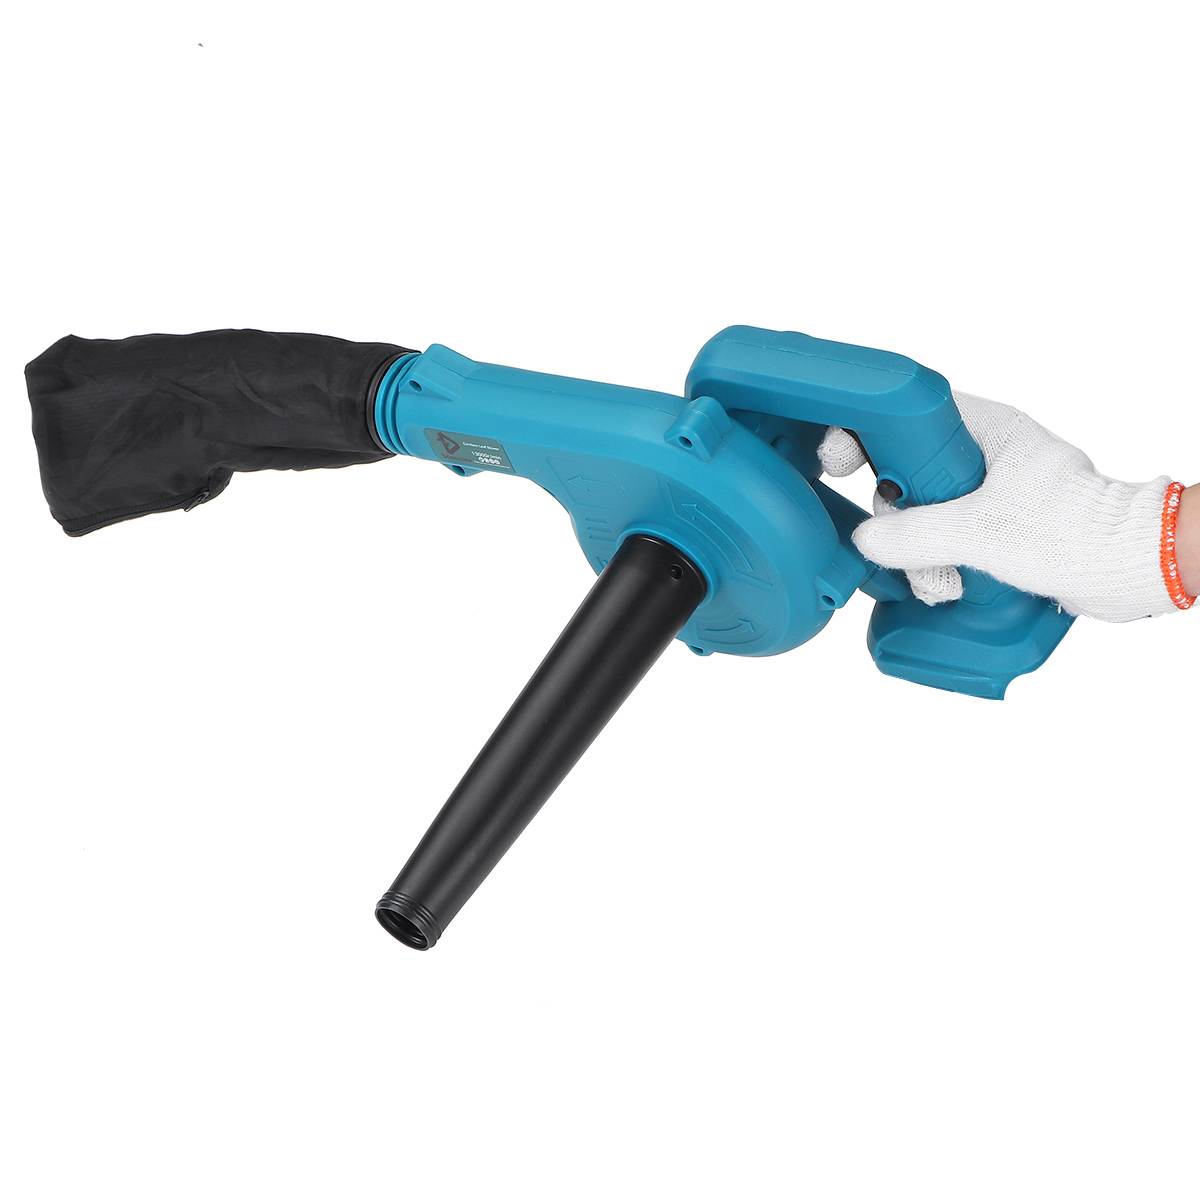 1800W-Electric-Blower-Cordless-Vacuum-Handhled-Cleaning-Tools-Dust-Blowing-Dust-Collector-Power-Tool-1912149-12